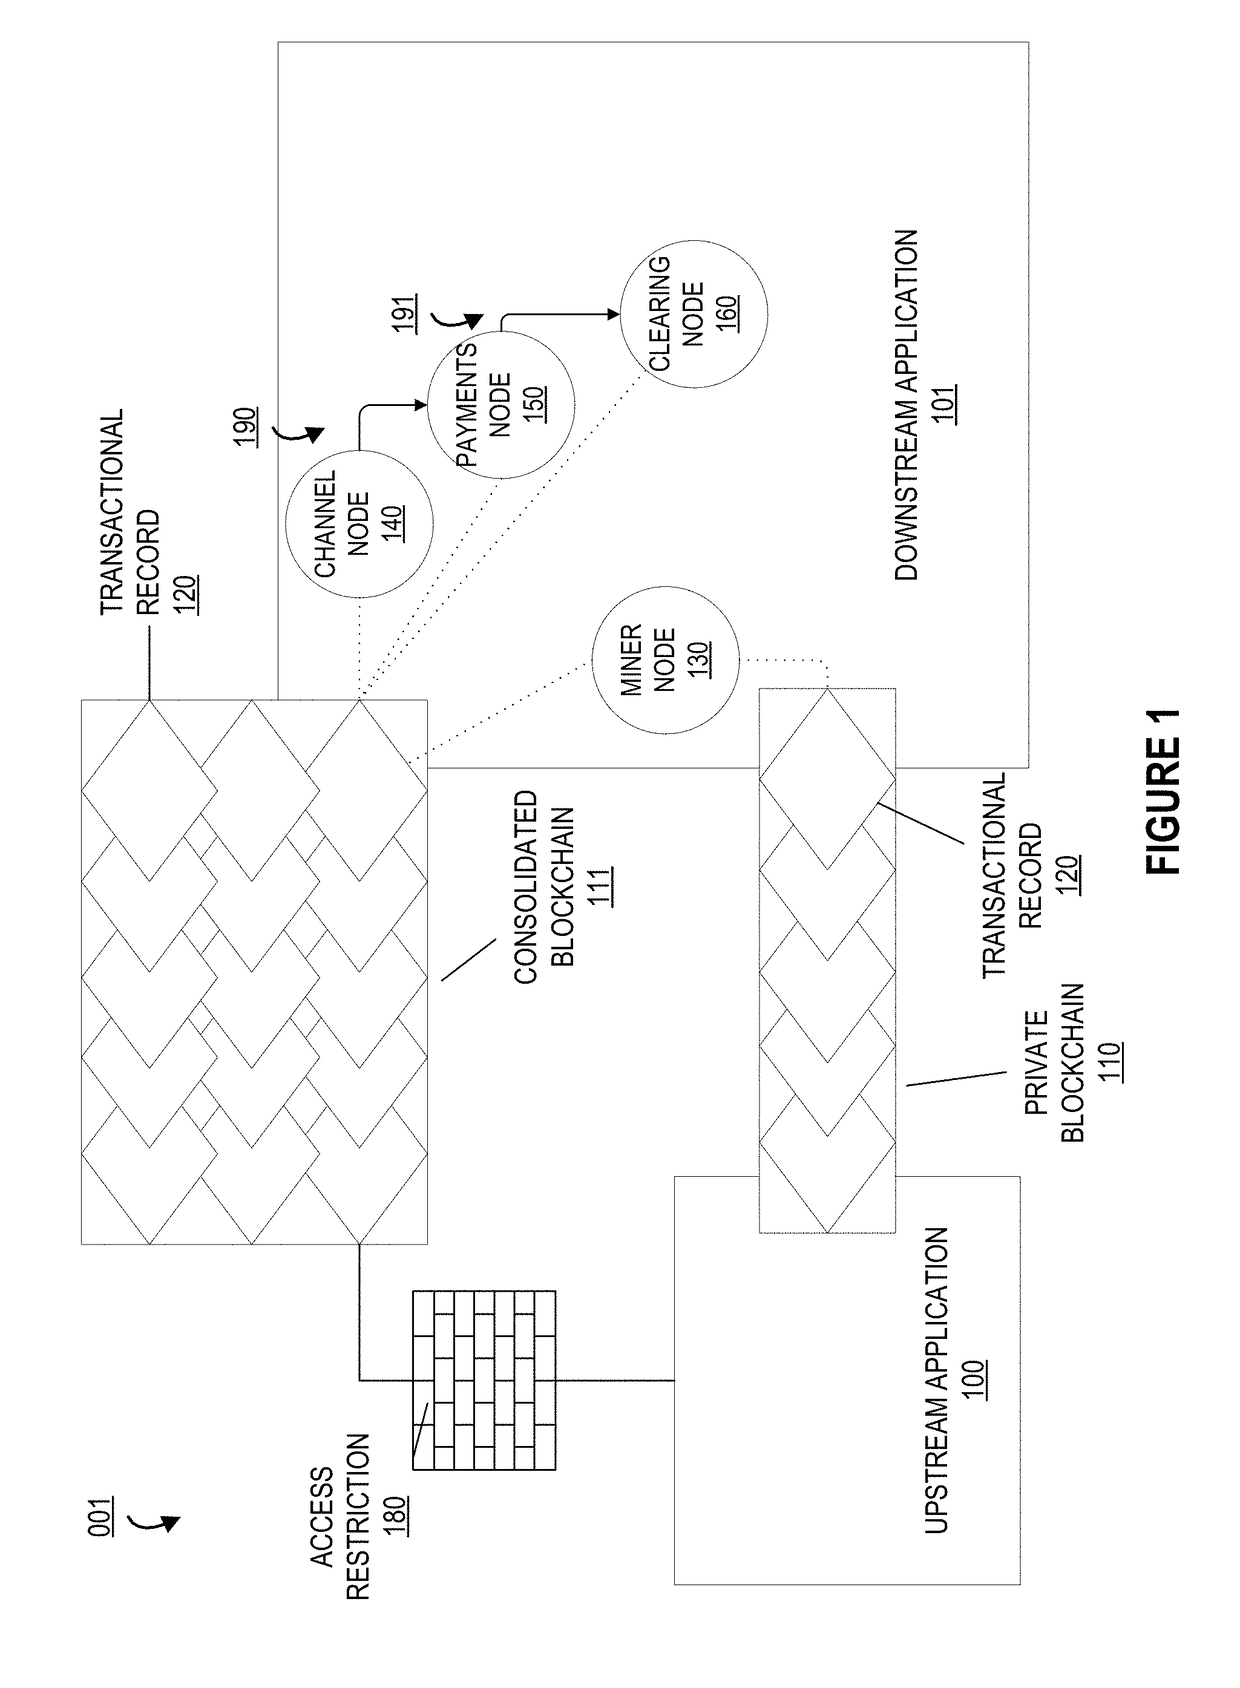 System for managing a virtual private ledger and distributing workflow of authenticated transactions within a blockchain distributed network